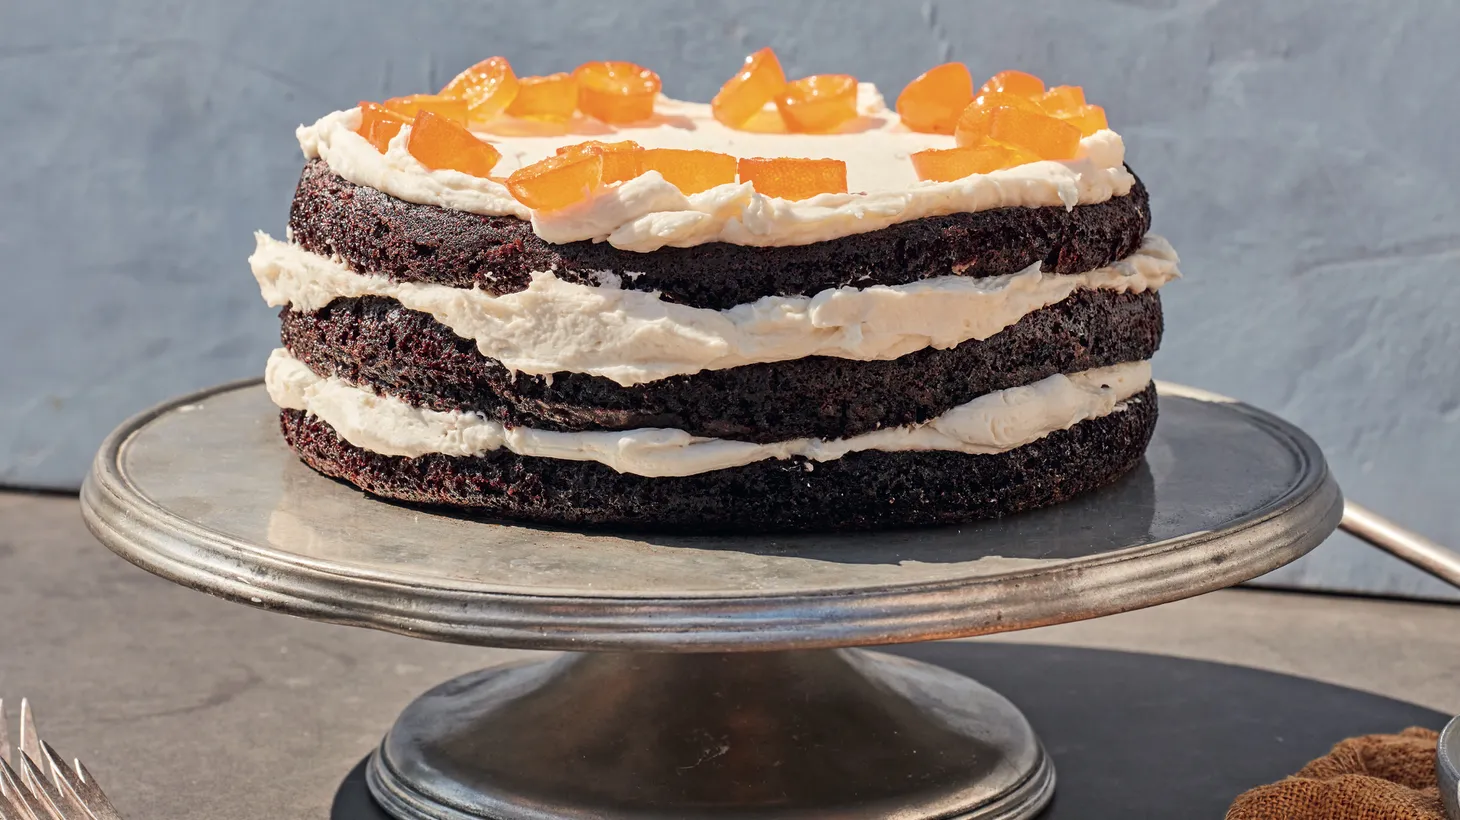 Claudia Fleming adapted this older recipe for a gingerbread cake from her wildly popular cookbook, “The Last Course.” She avoided serving layer cakes in her restaurants because her style was more deconstructed while coaxing flavor without too much sweetness.